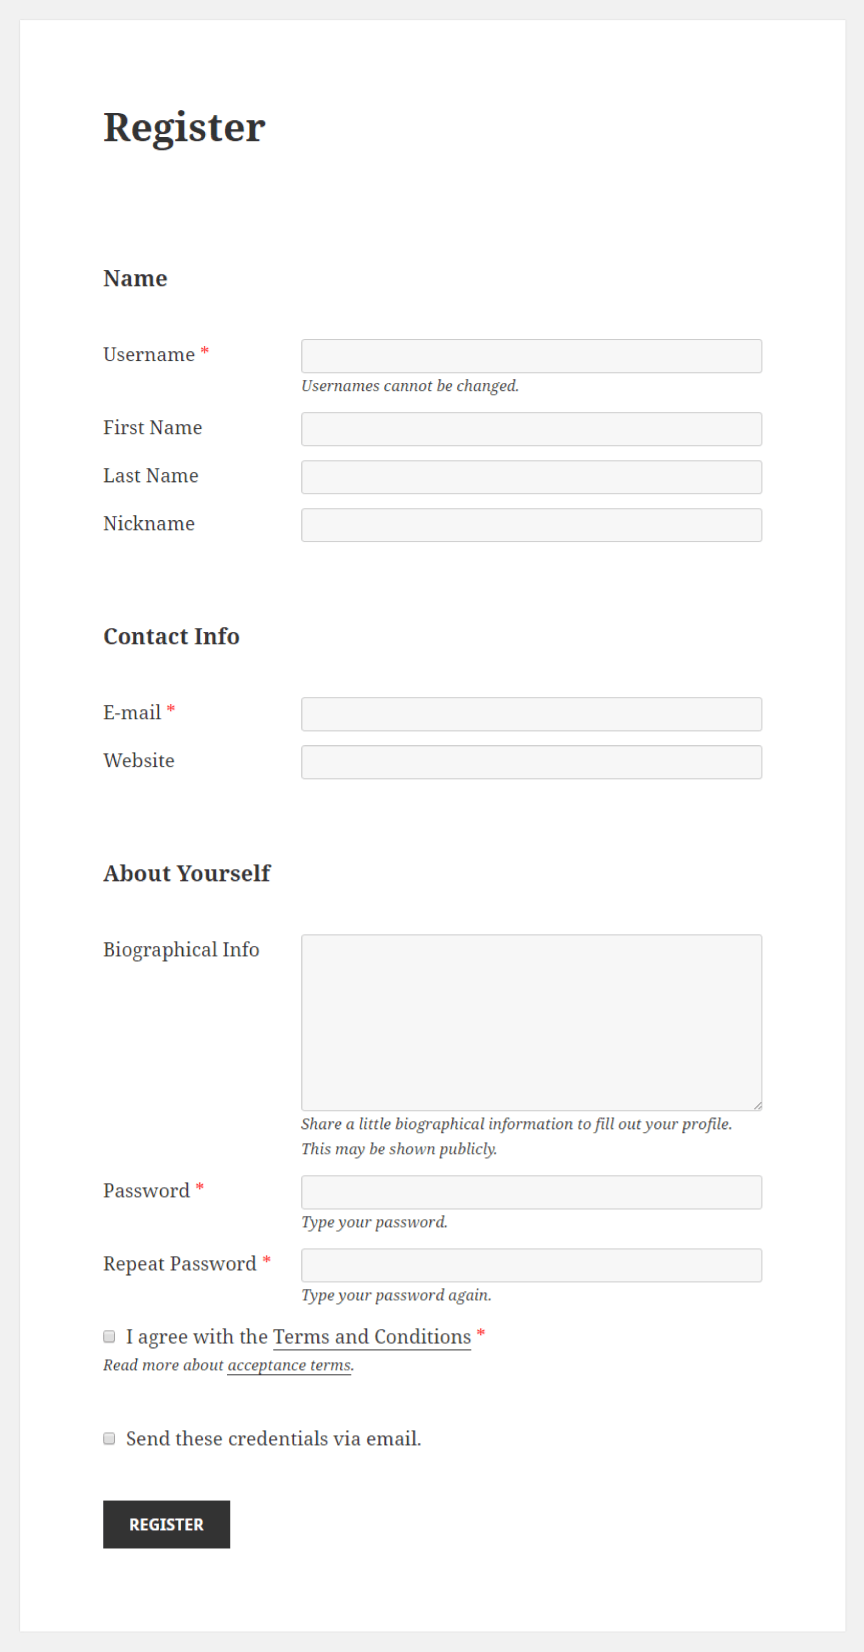 Profile Builder - Checkbox (Terms and Conditions) Field Front-End